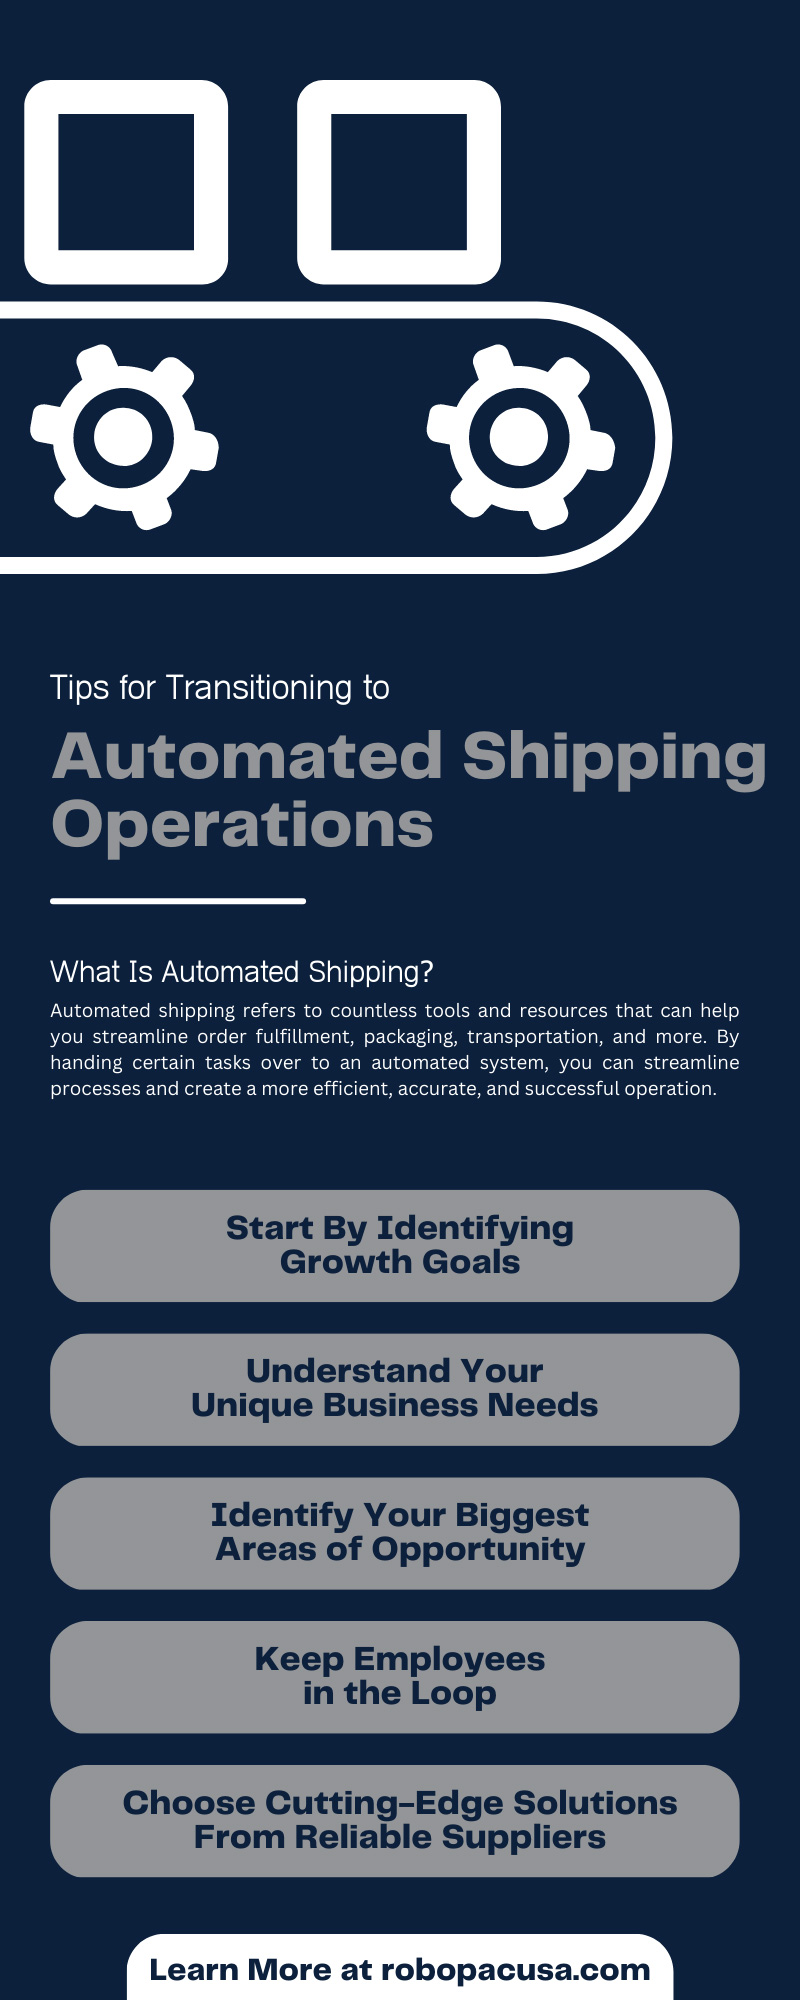 Tips for Transitioning to Automated Shipping Operations 